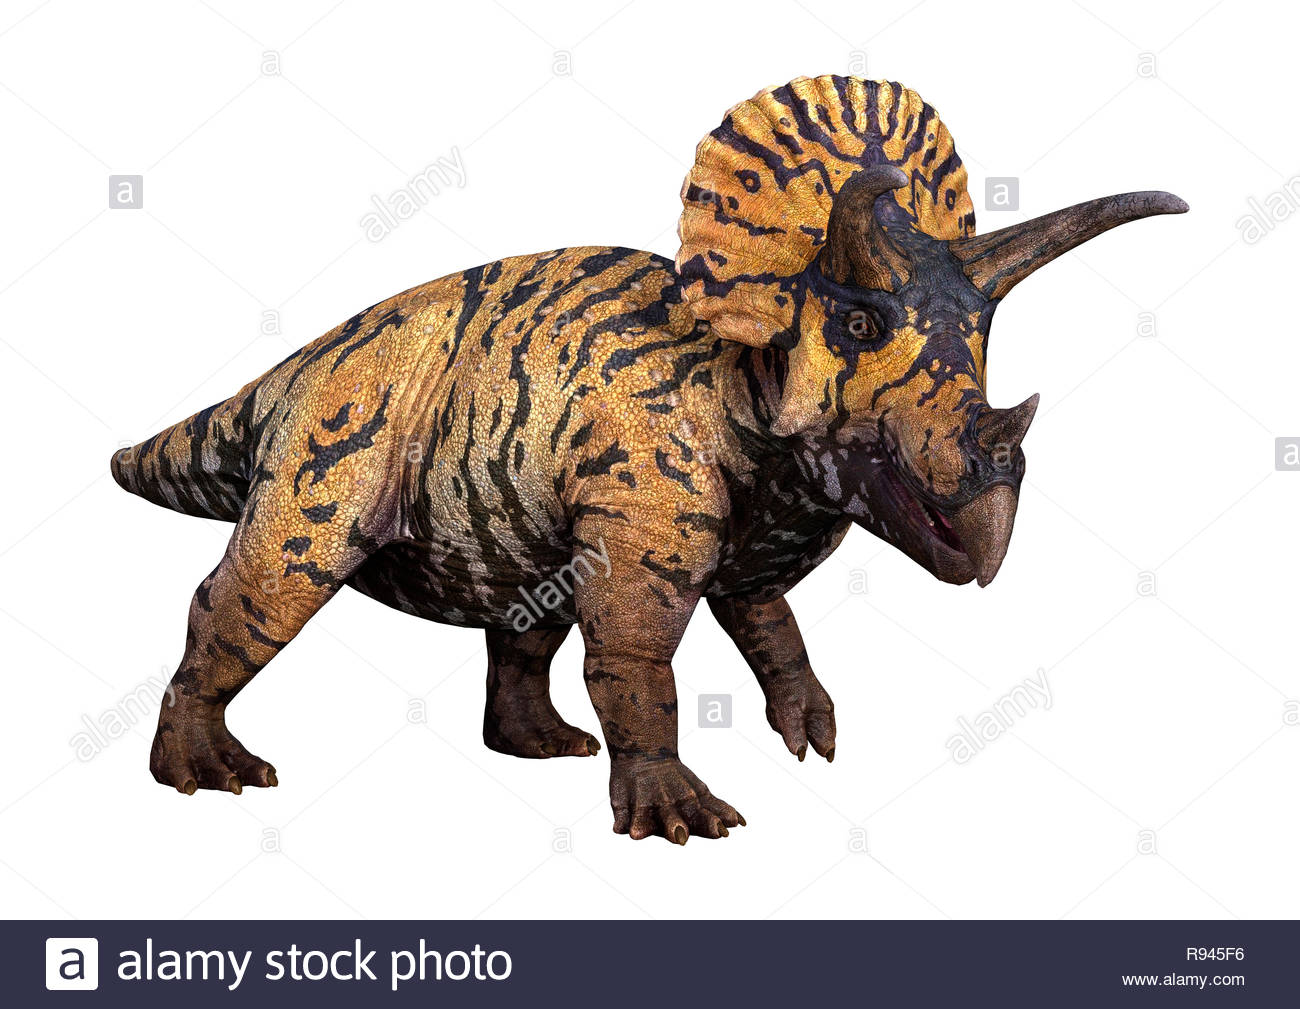 3d Rendering Of A Dinosaur Triceratops Isolated On White